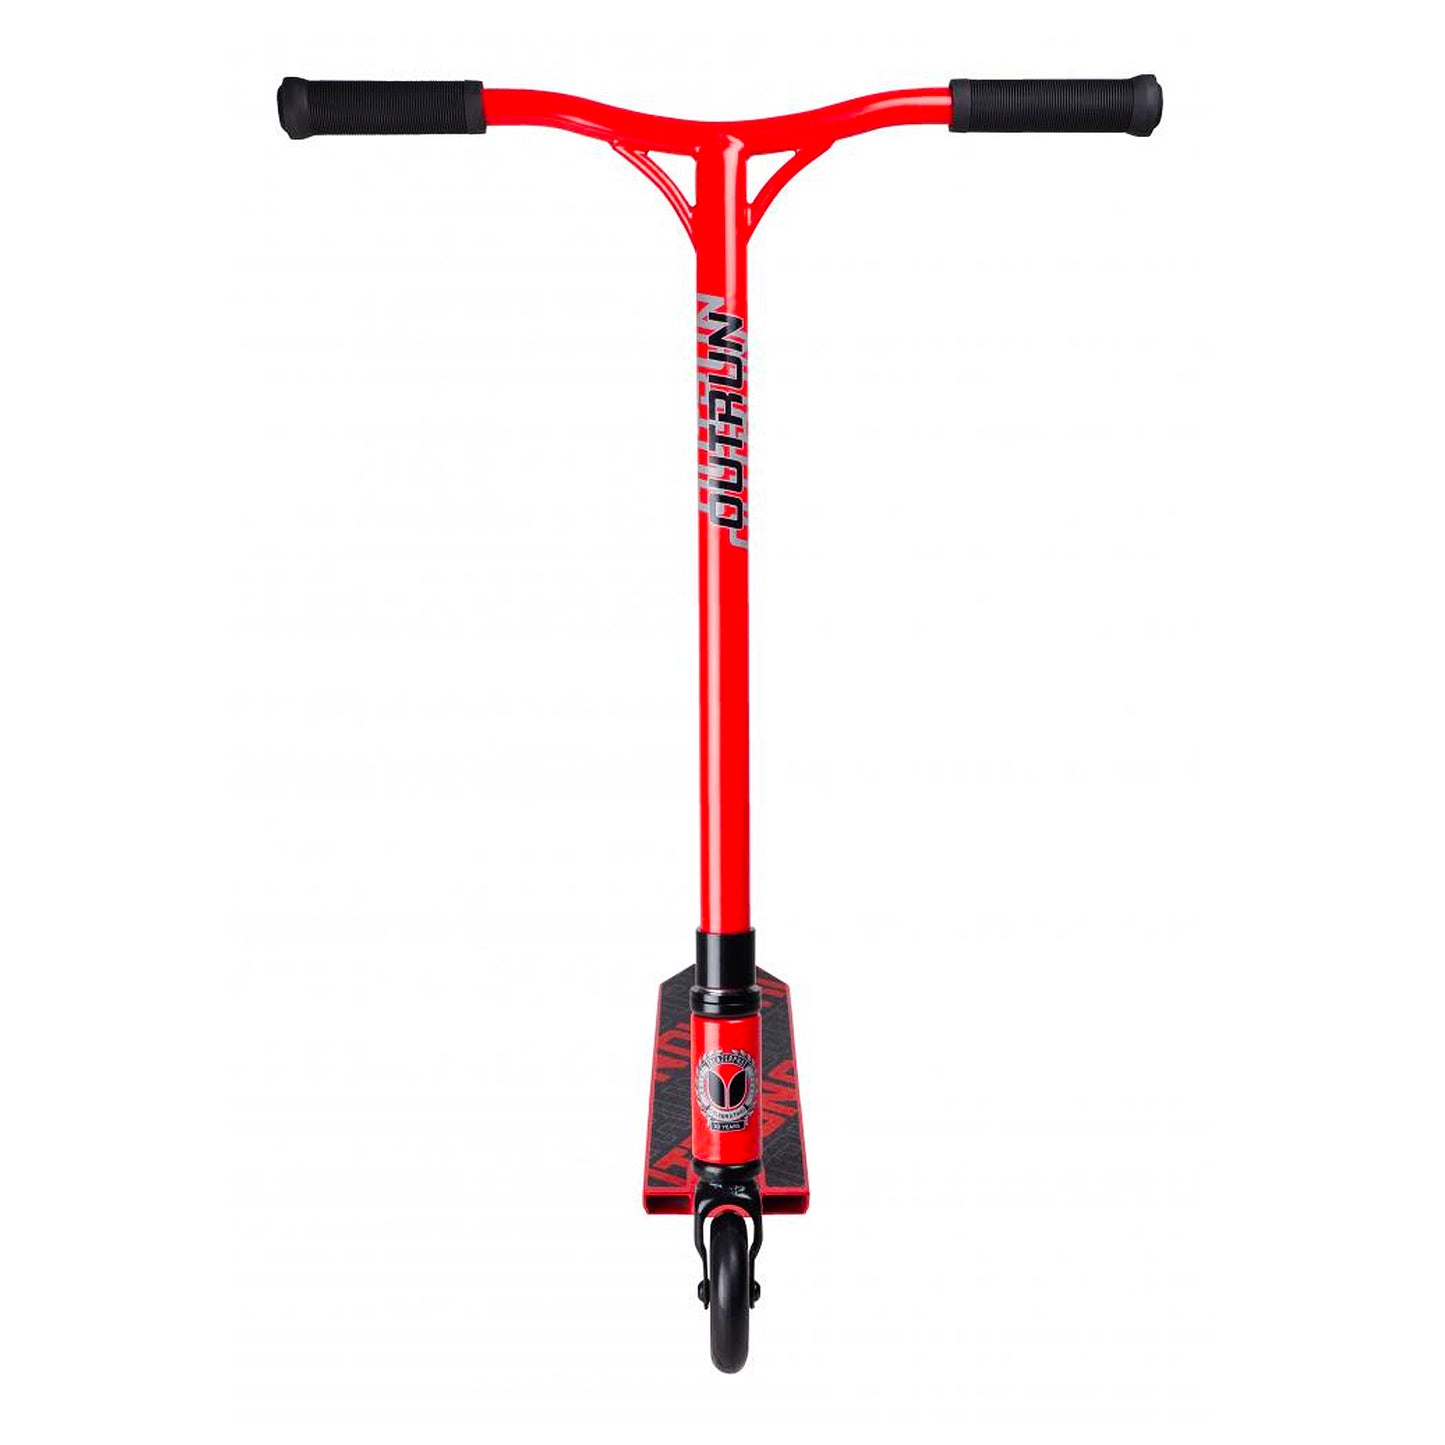 Blazer Pro Complete Outrun 2 Scooter - Red - Prime Delux Store